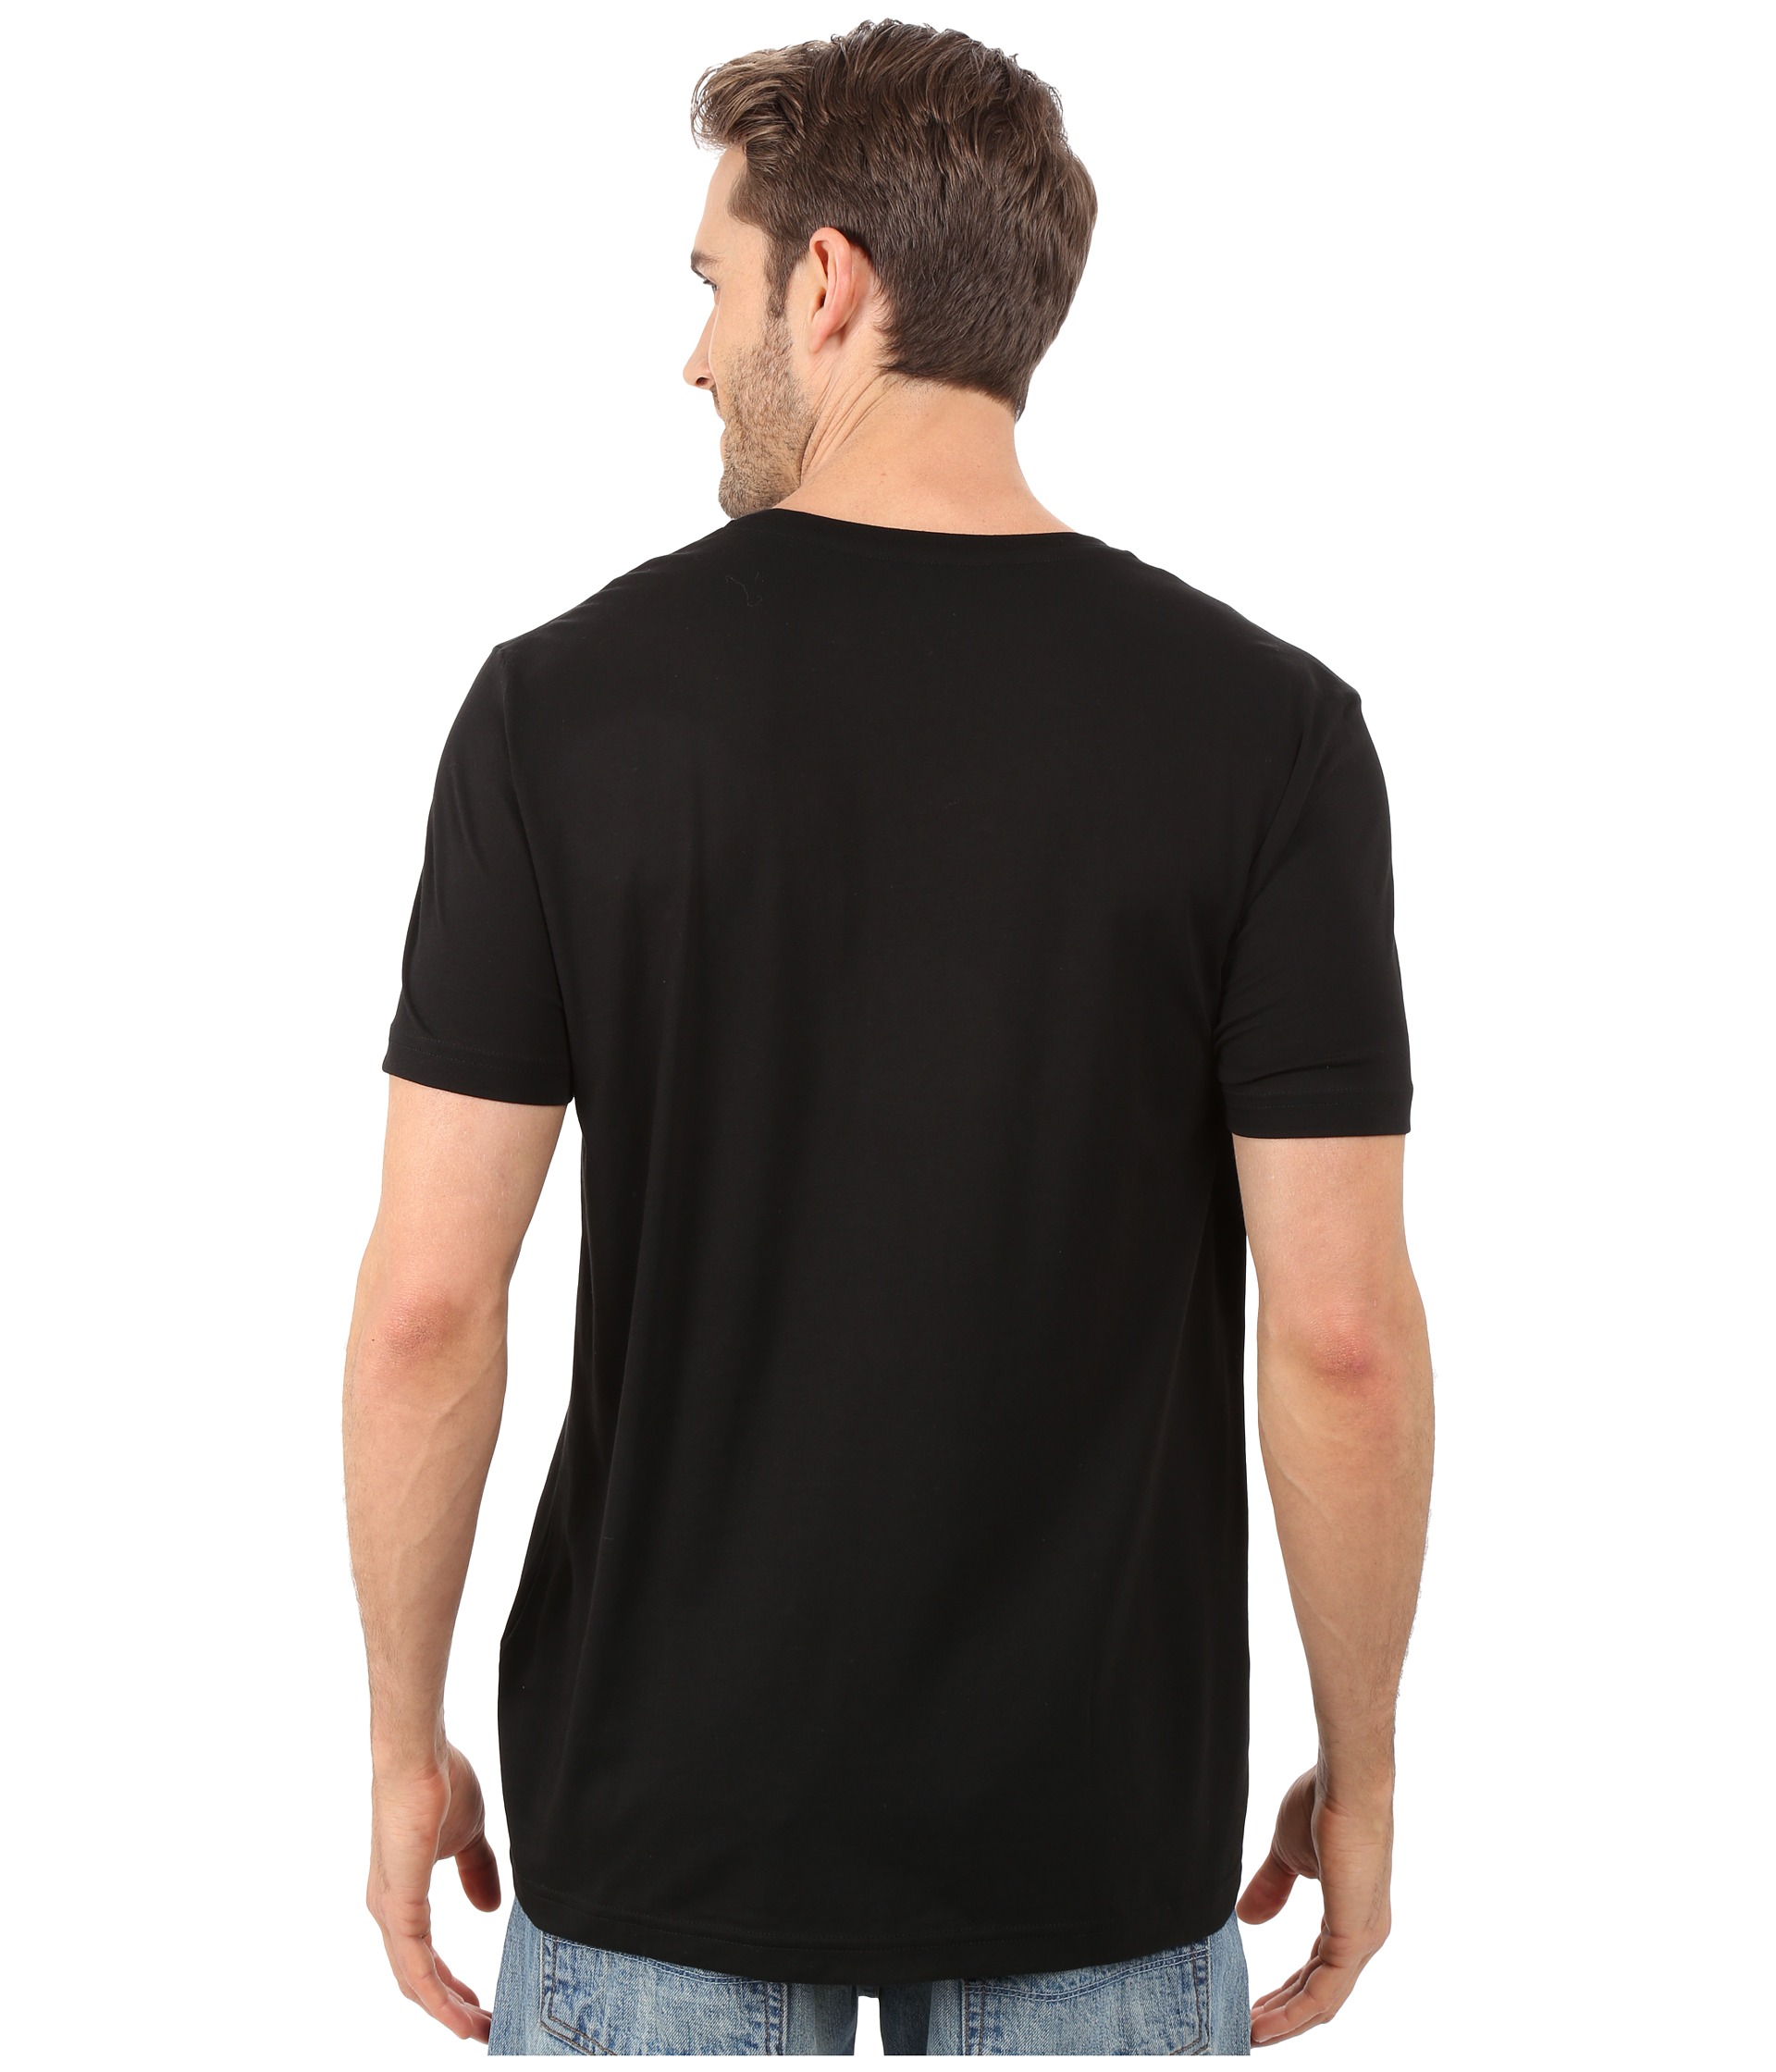 black-t-shirt-front-and-back-buy-plain-black-t-shirt-online-in-india